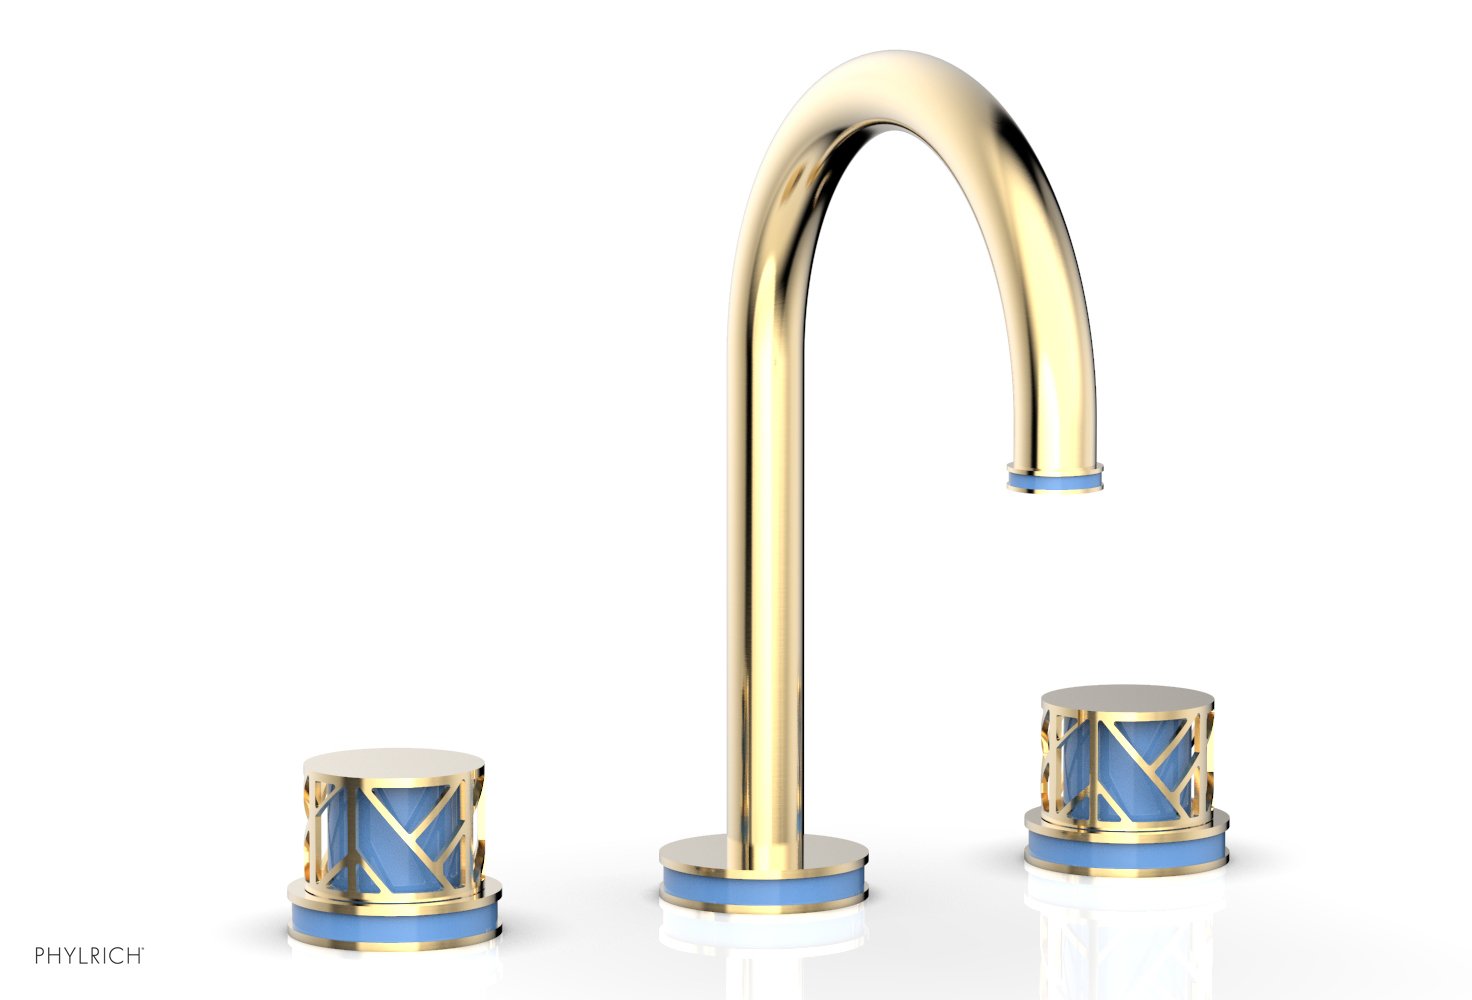 Phylrich JOLIE Widespread Faucet - Round Handles with "Light Blue" Accents